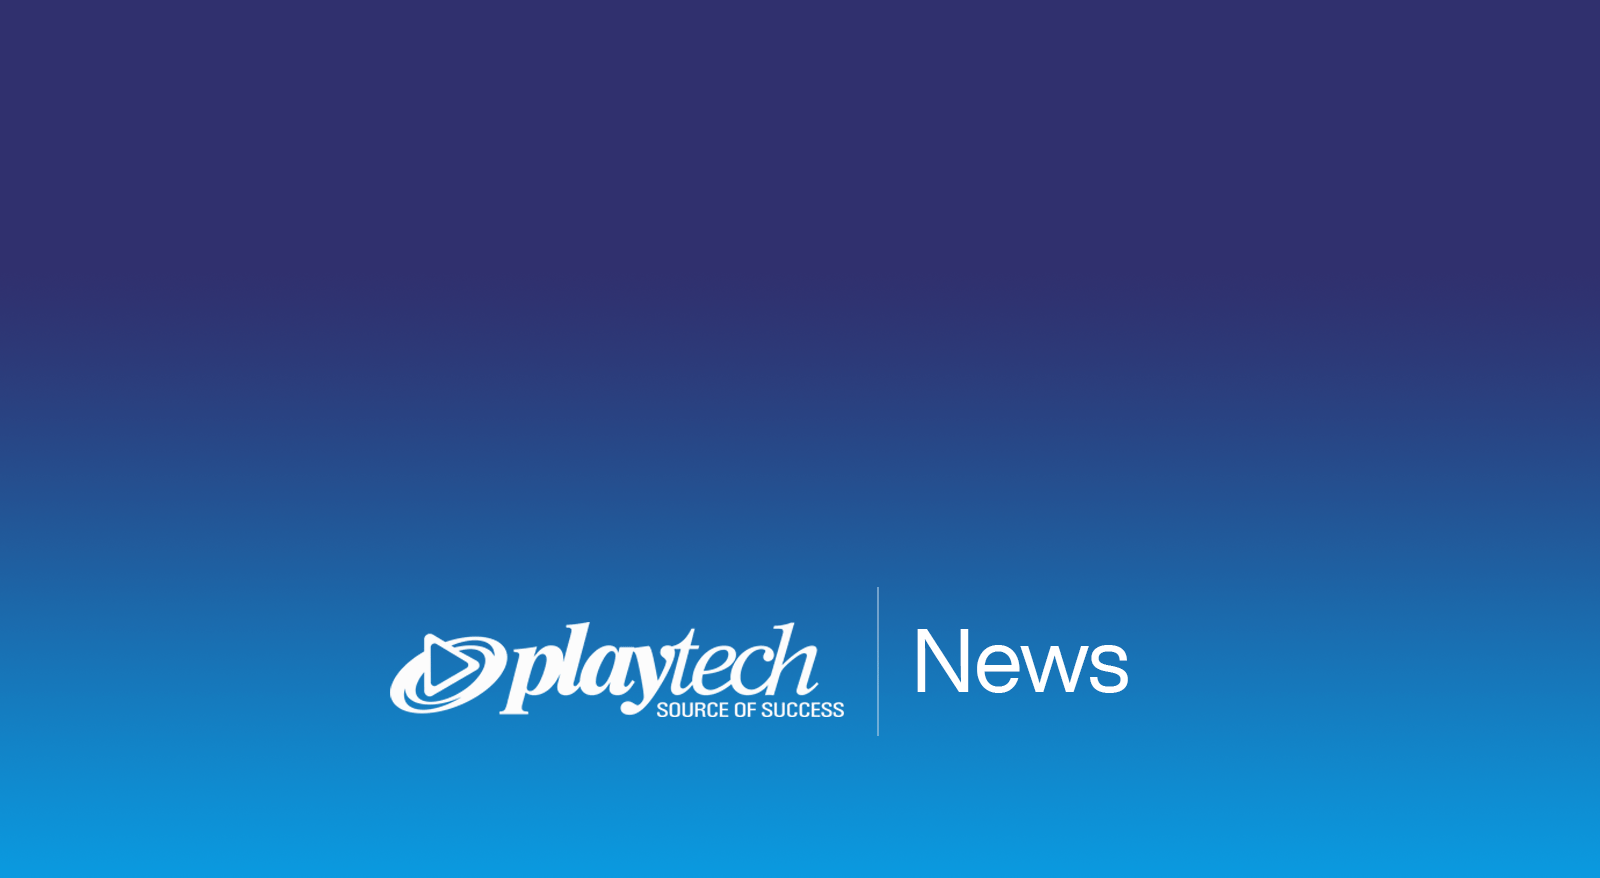 playtech-live-secures-exclusive-worldwide-deal-with-fremantle-for-iconic-family-feud-franchise